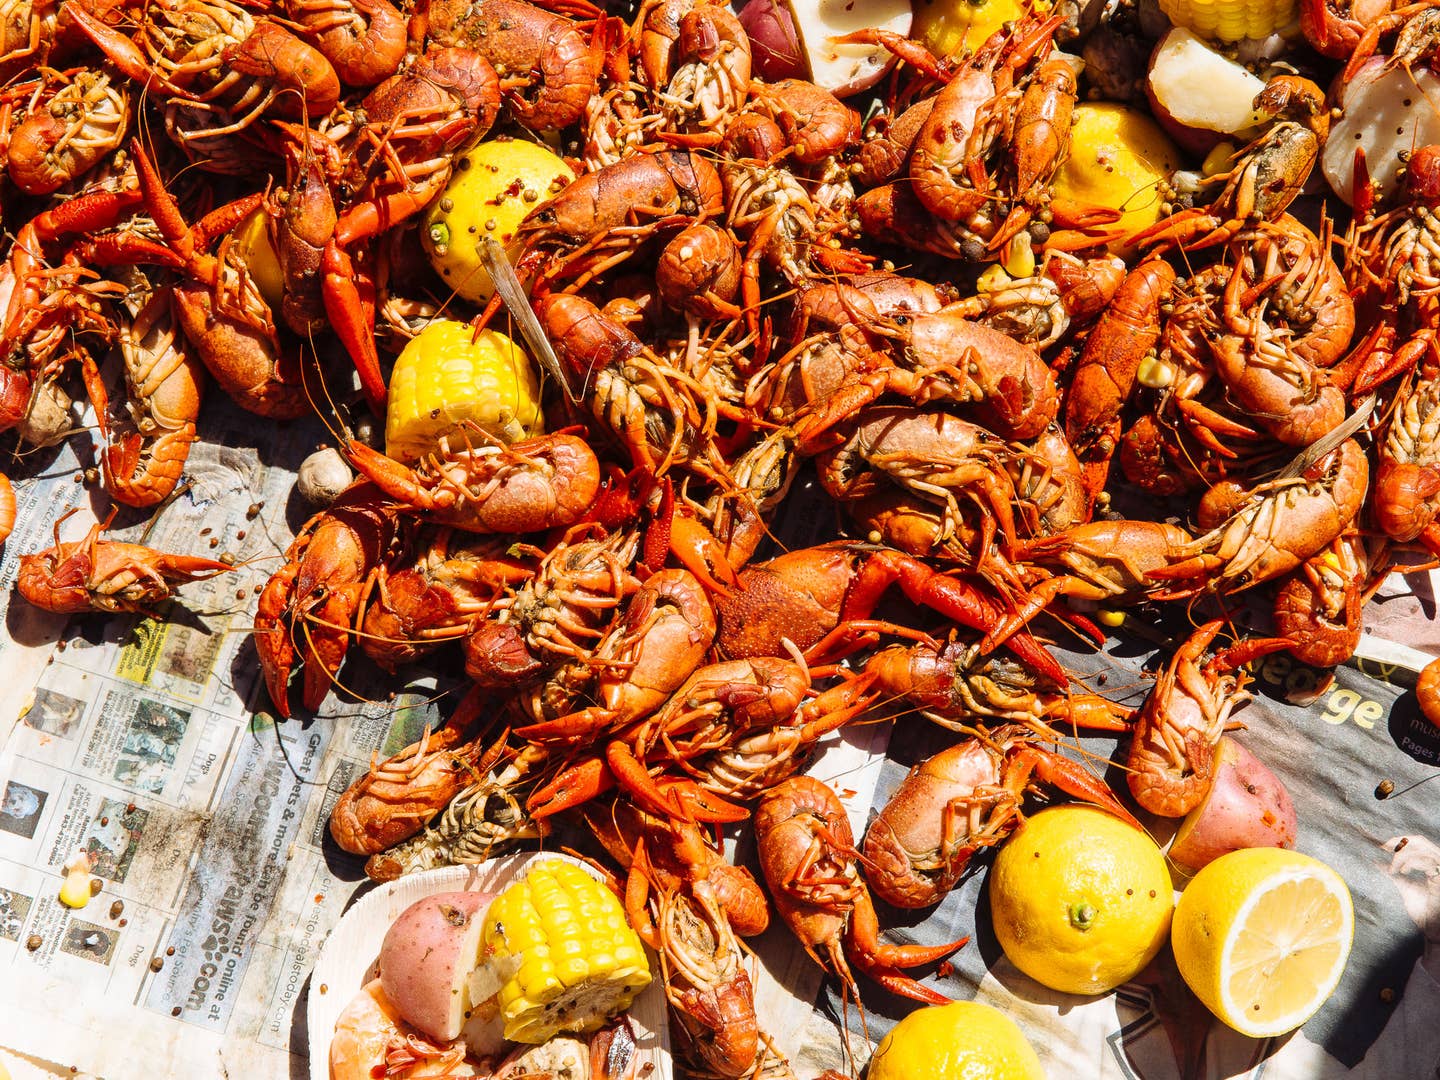 What’s Goes Into a Crawfish Boil? (Besides Crawfish, That Is)